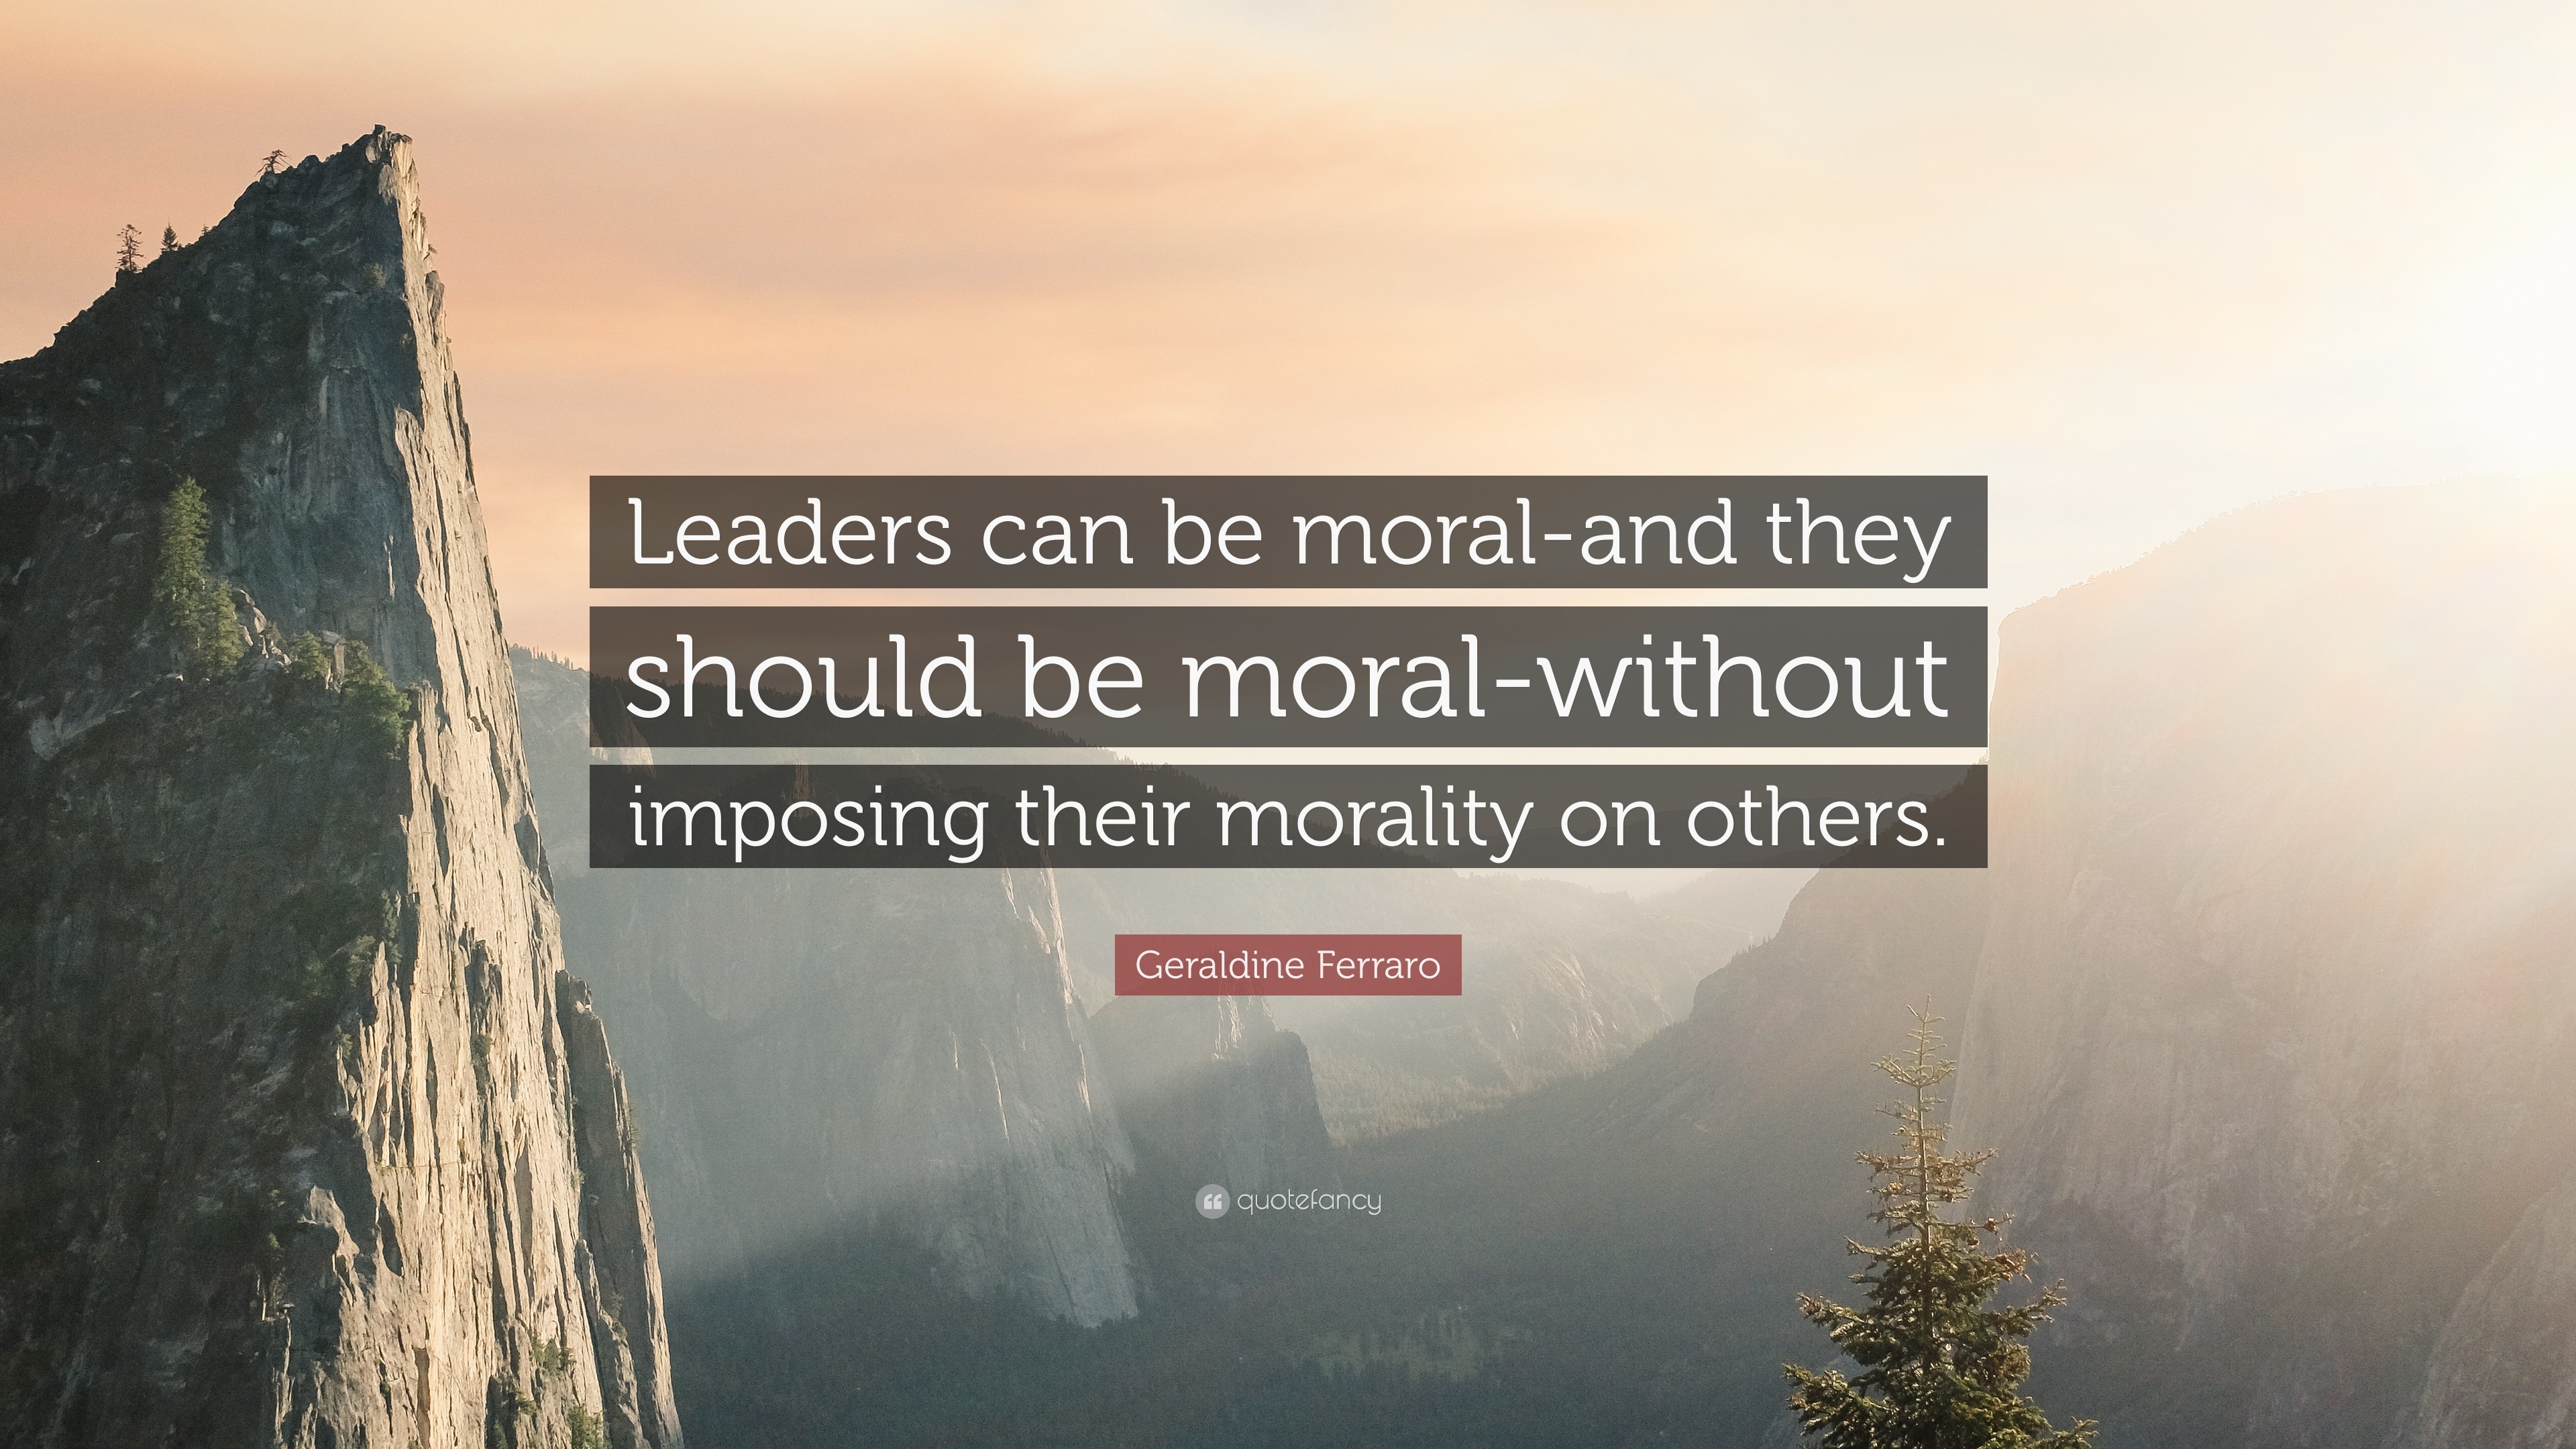 Geraldine Ferraro Quote: “Leaders can be moral-and they should be moral